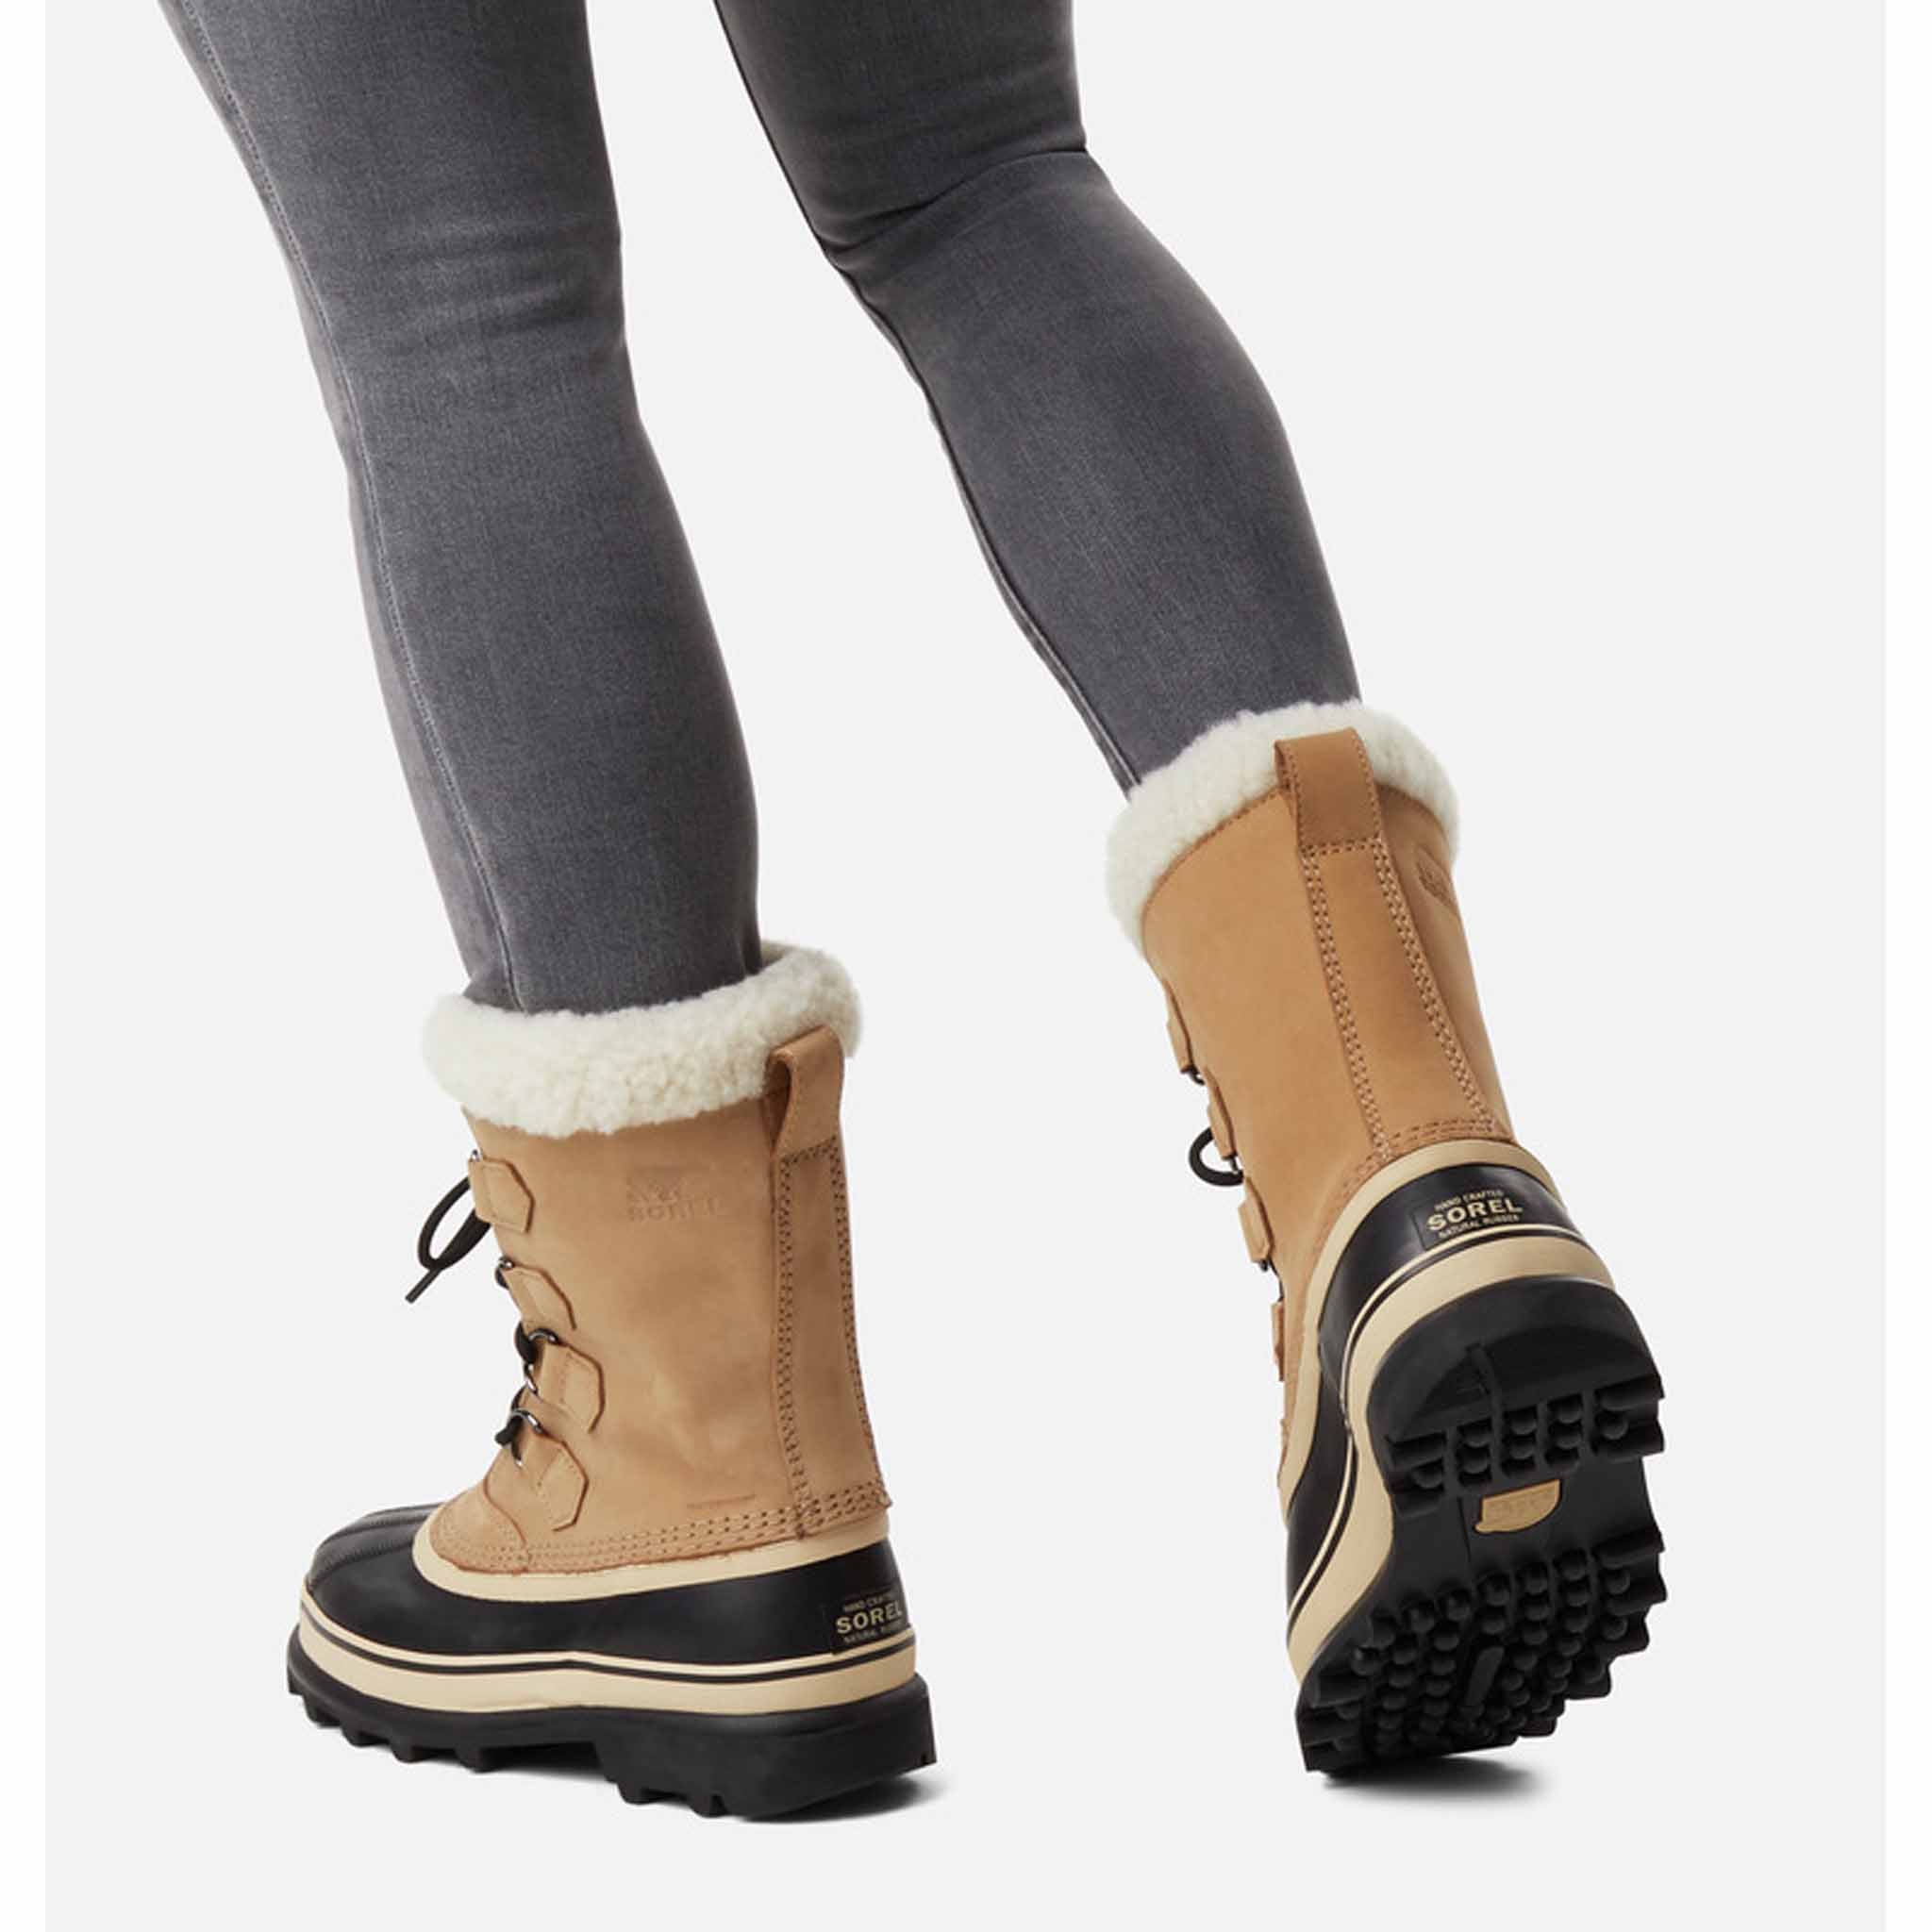 Not fashionable Attach to Biggest Sorel Caribou winter boots for women - Soccer Sport Fitness